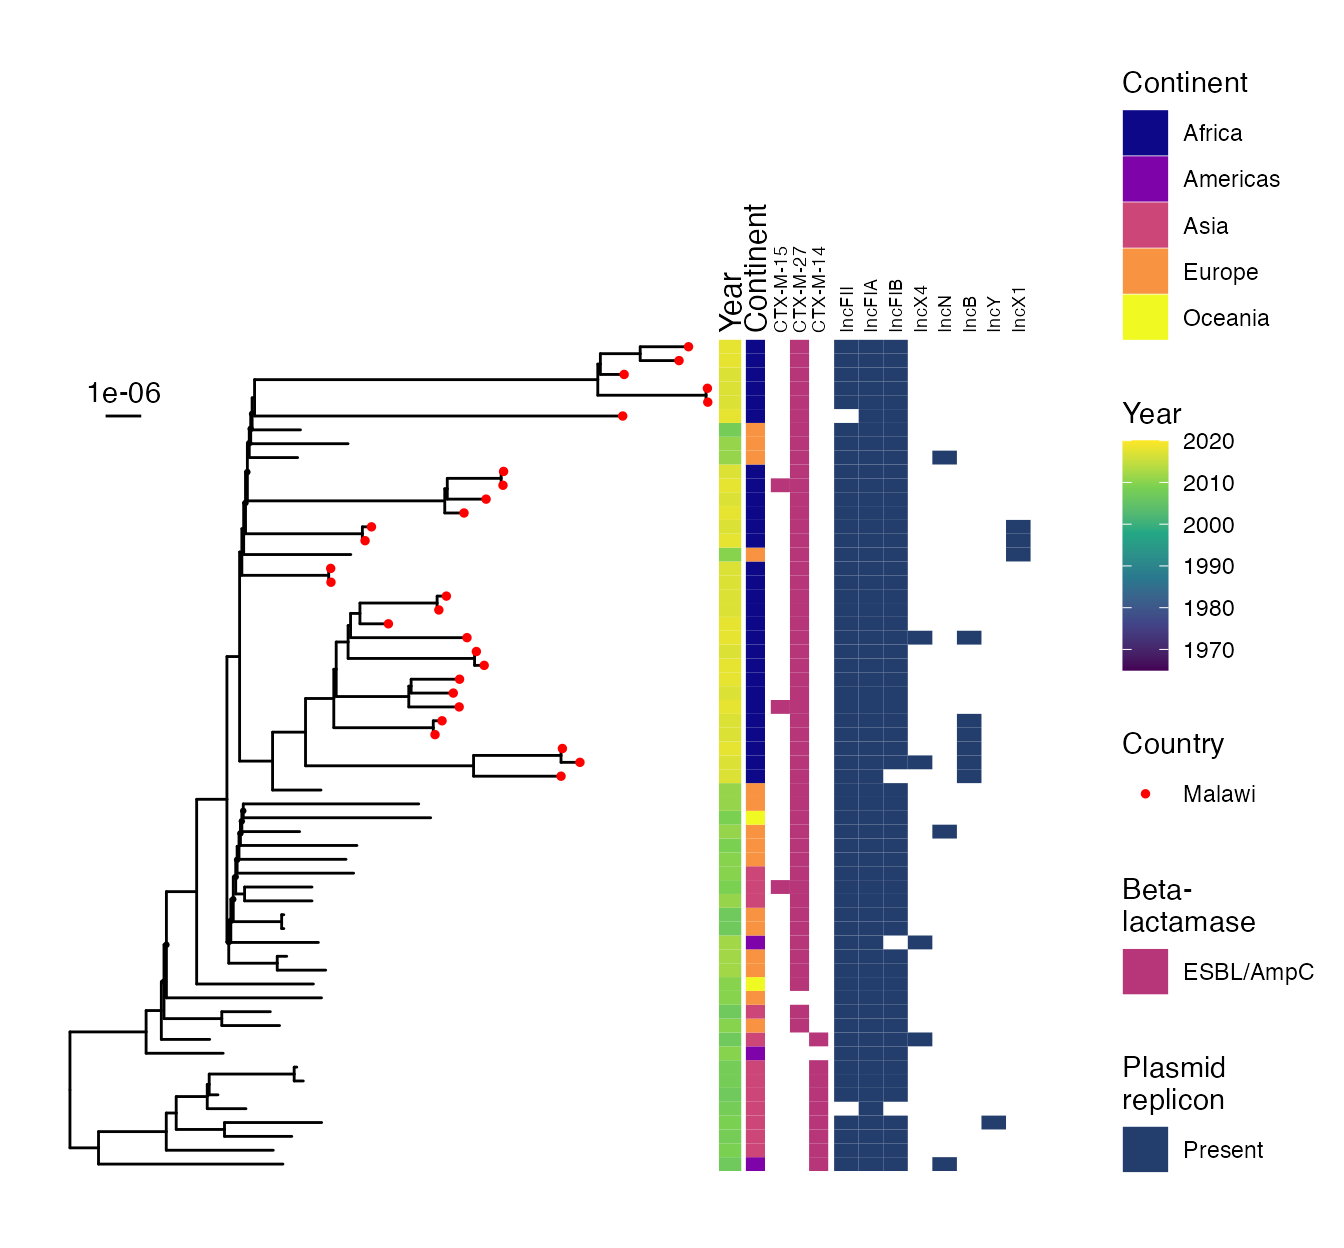 E. coli ST131 subtree showing detail of CTX-M-27 isolates and one area in which Malawian isolates are monophyletic